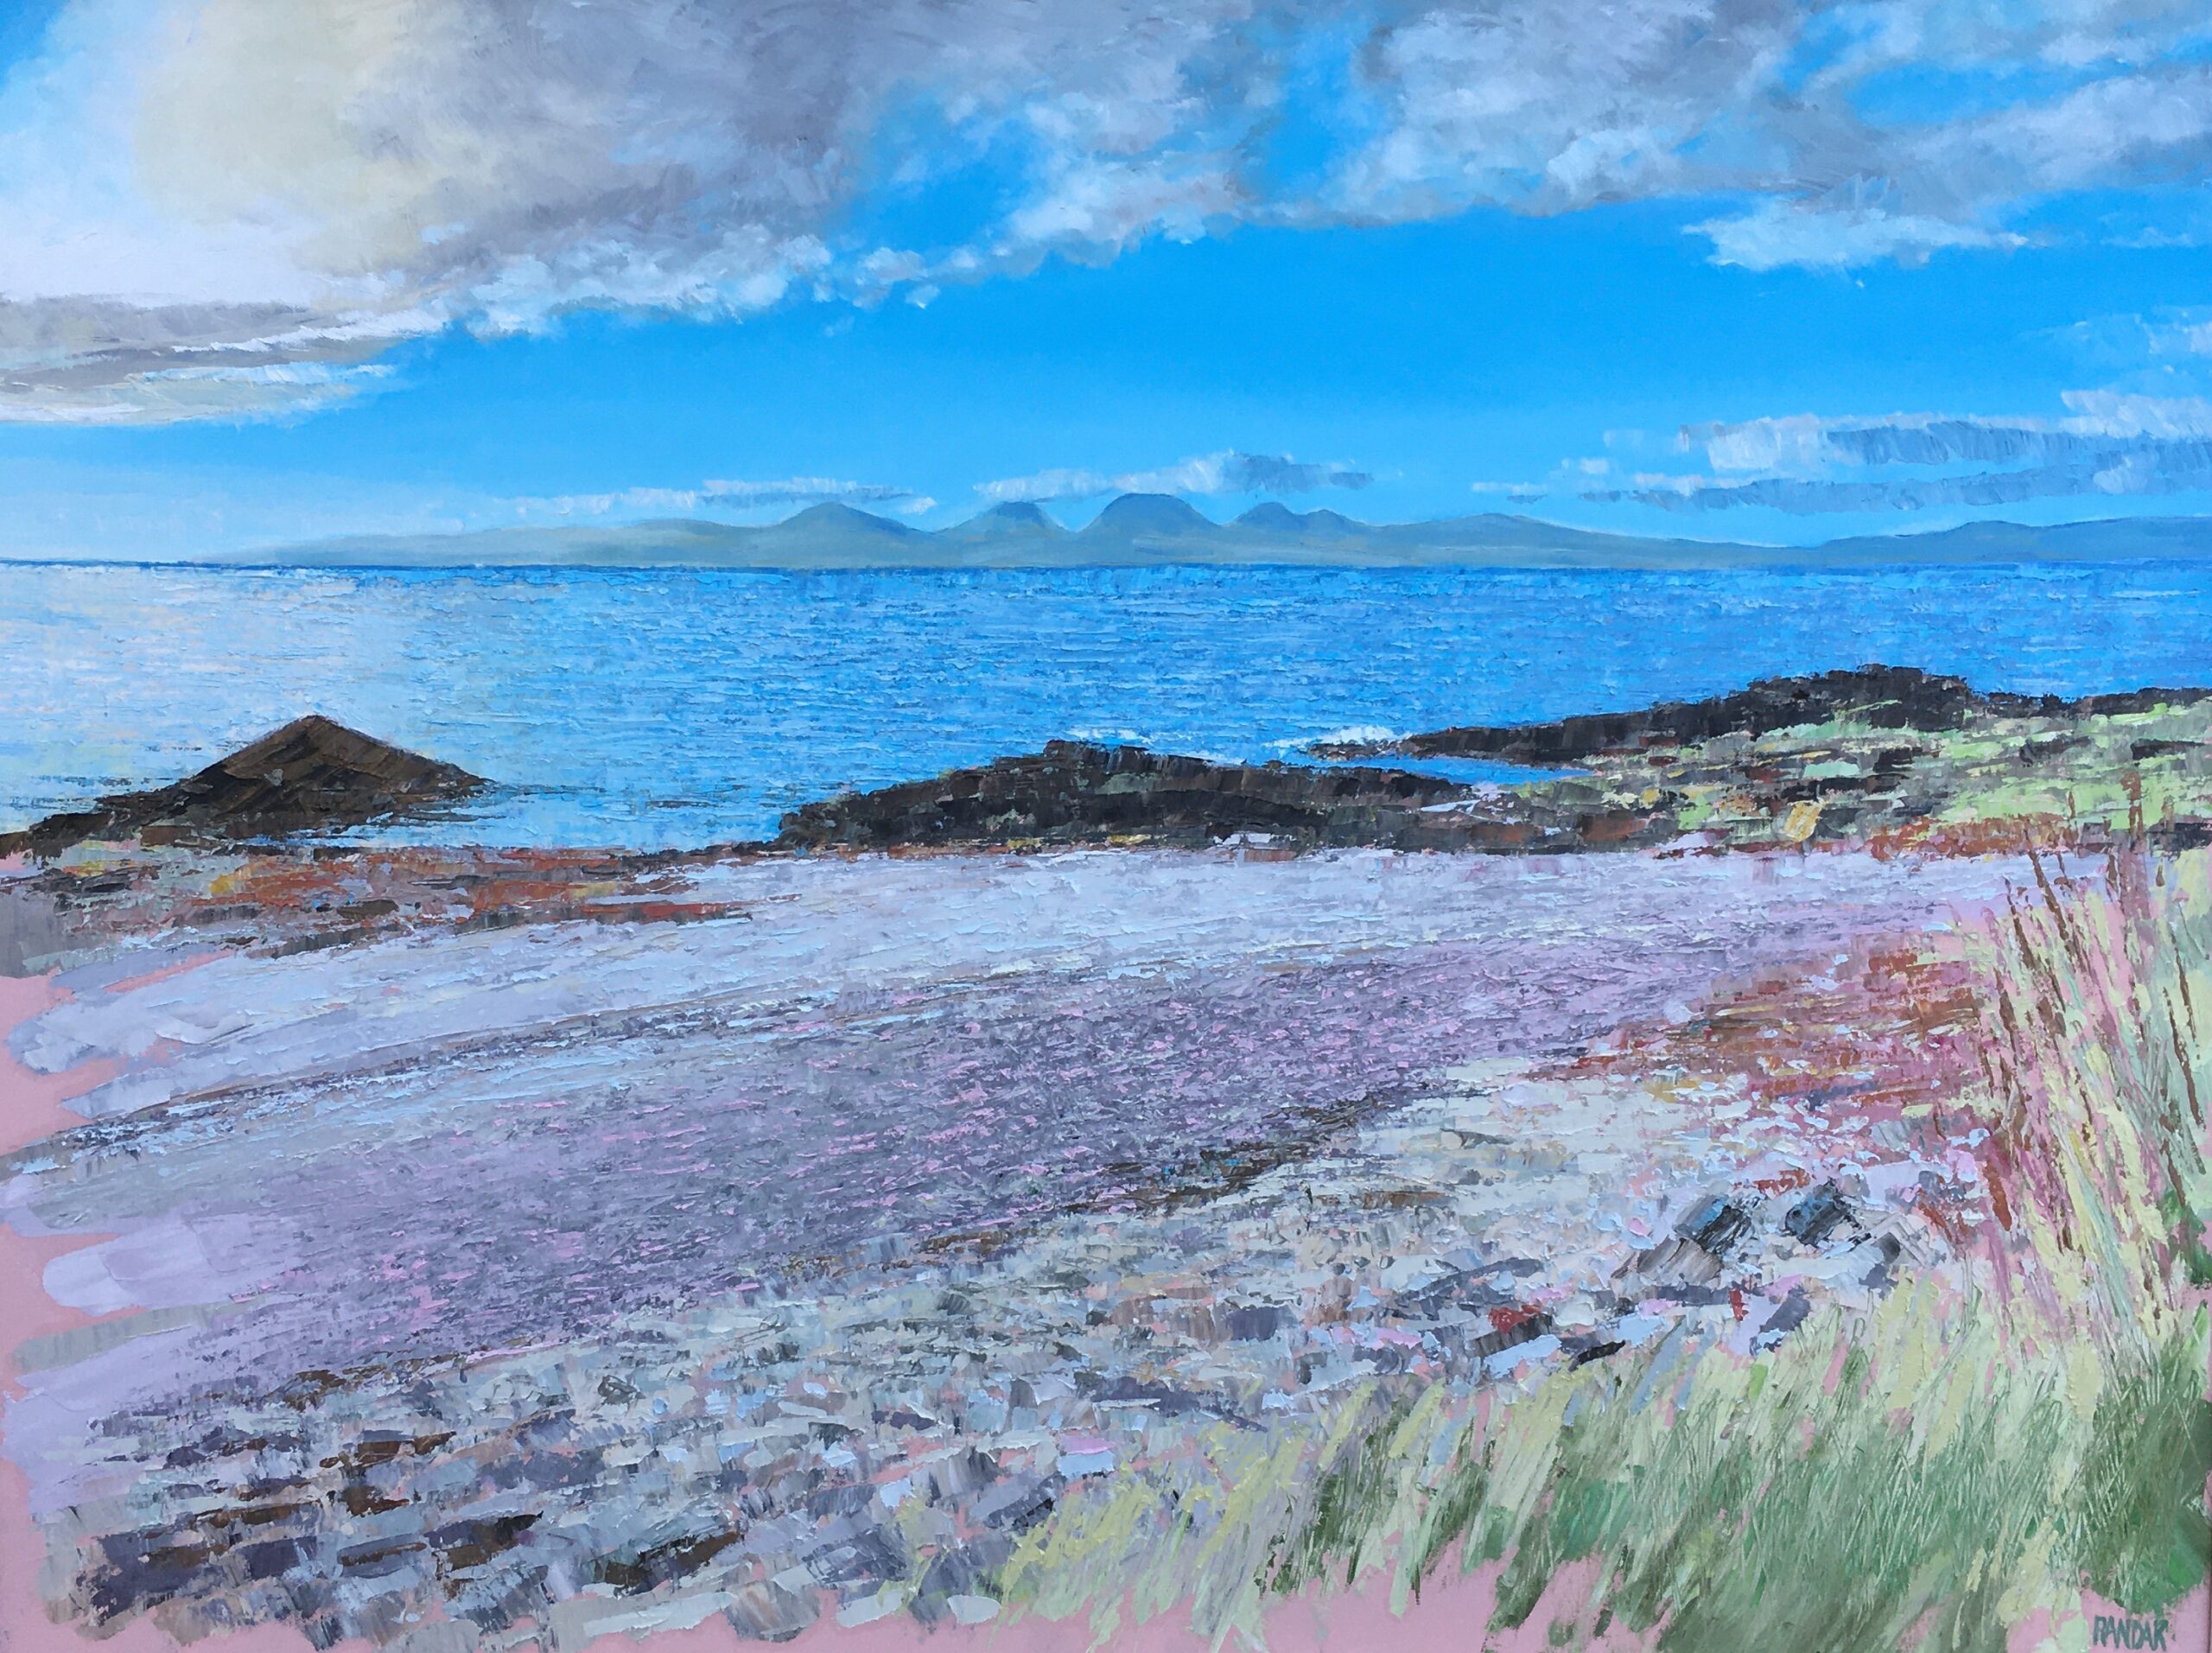 Oil on Canvas painting of the Evening Sunset at Statfield Bay, Knapdale, Scotland